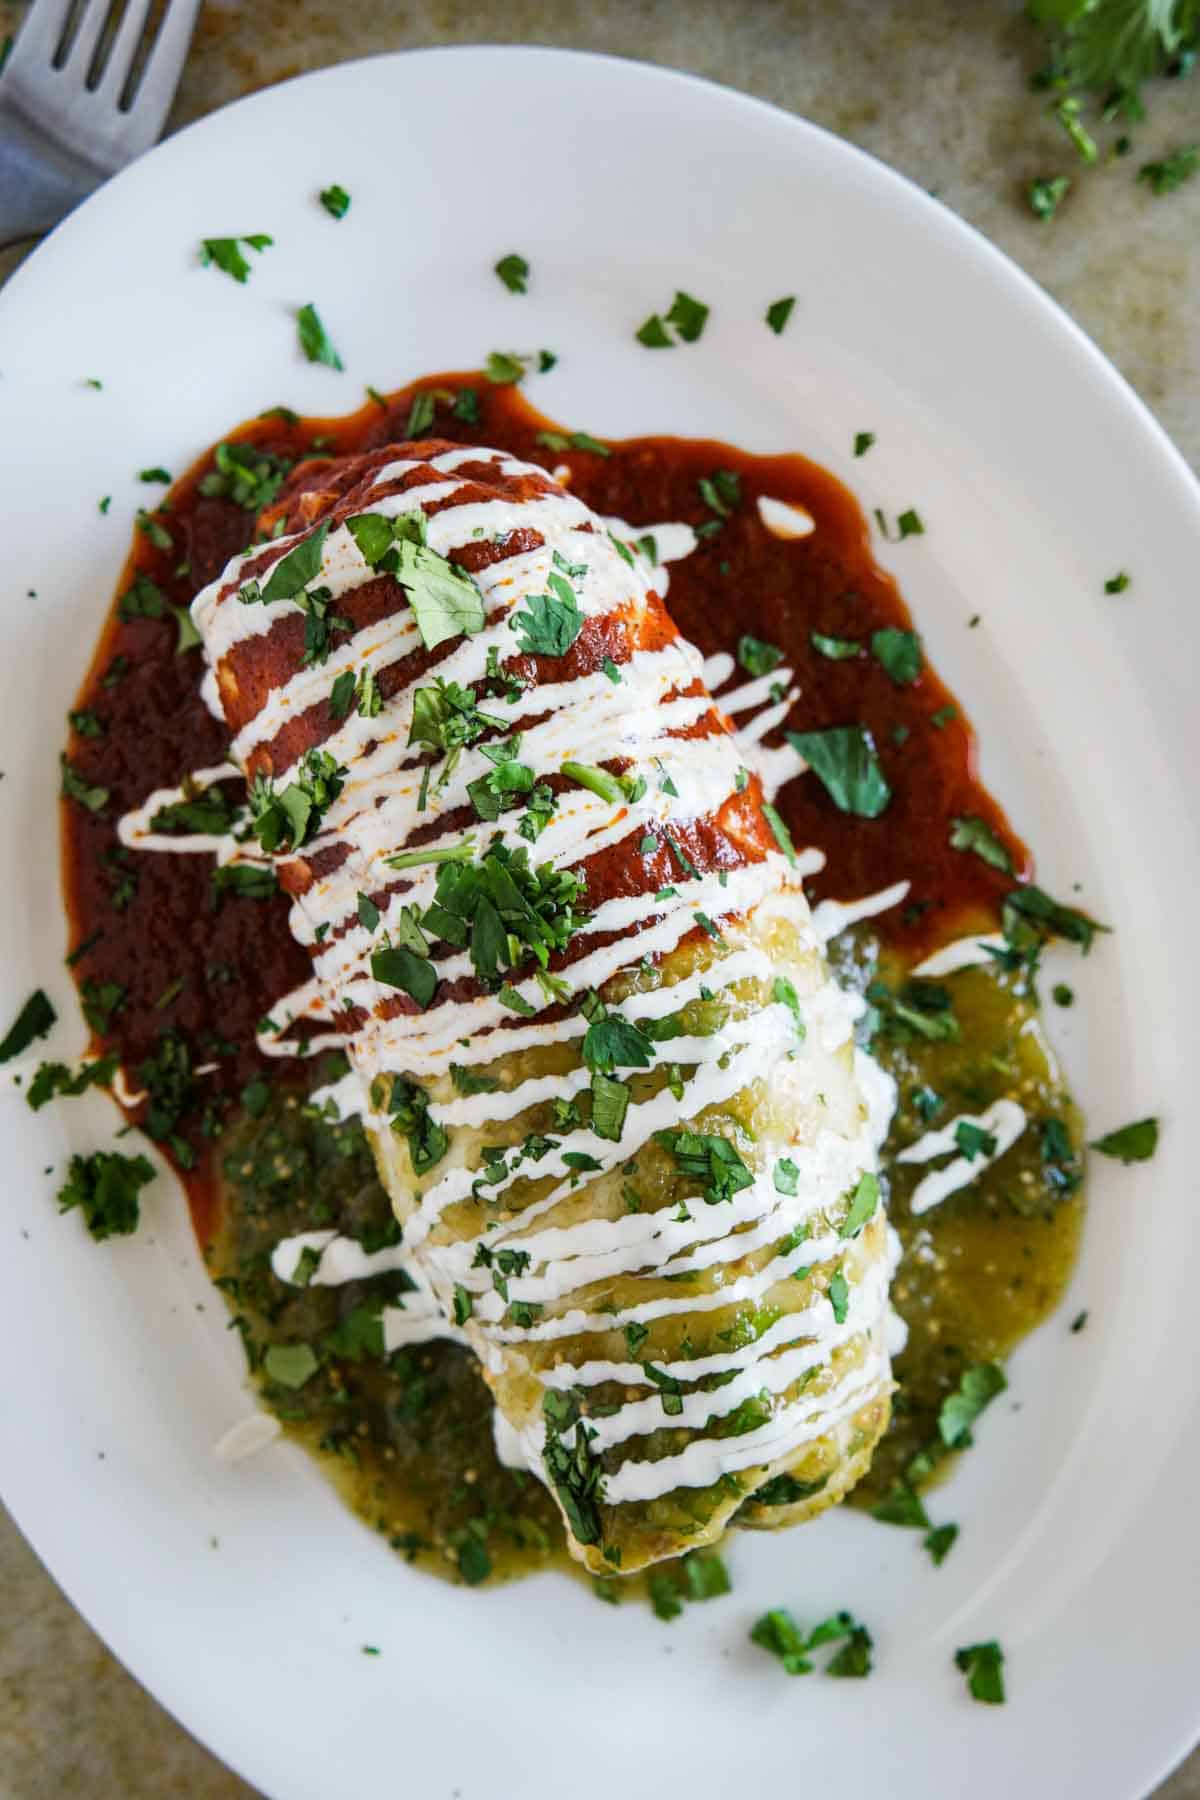 Chicken Burritos Smothered with Red and Green Sauce